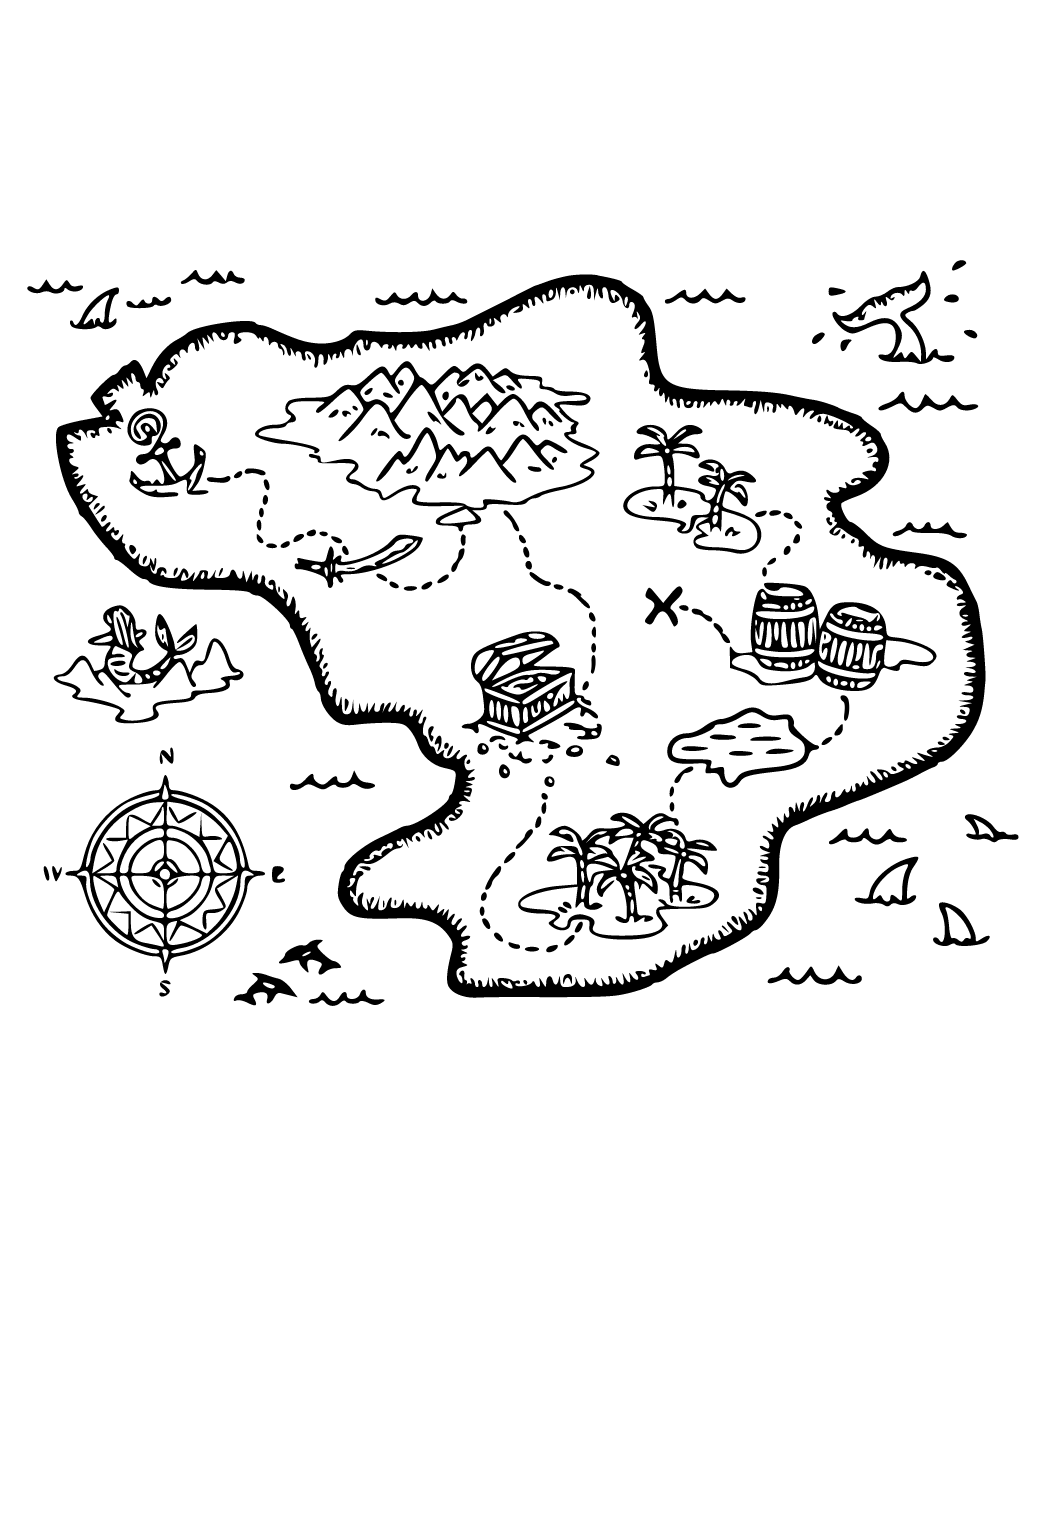 Free printable treasure map island coloring page for adults and kids